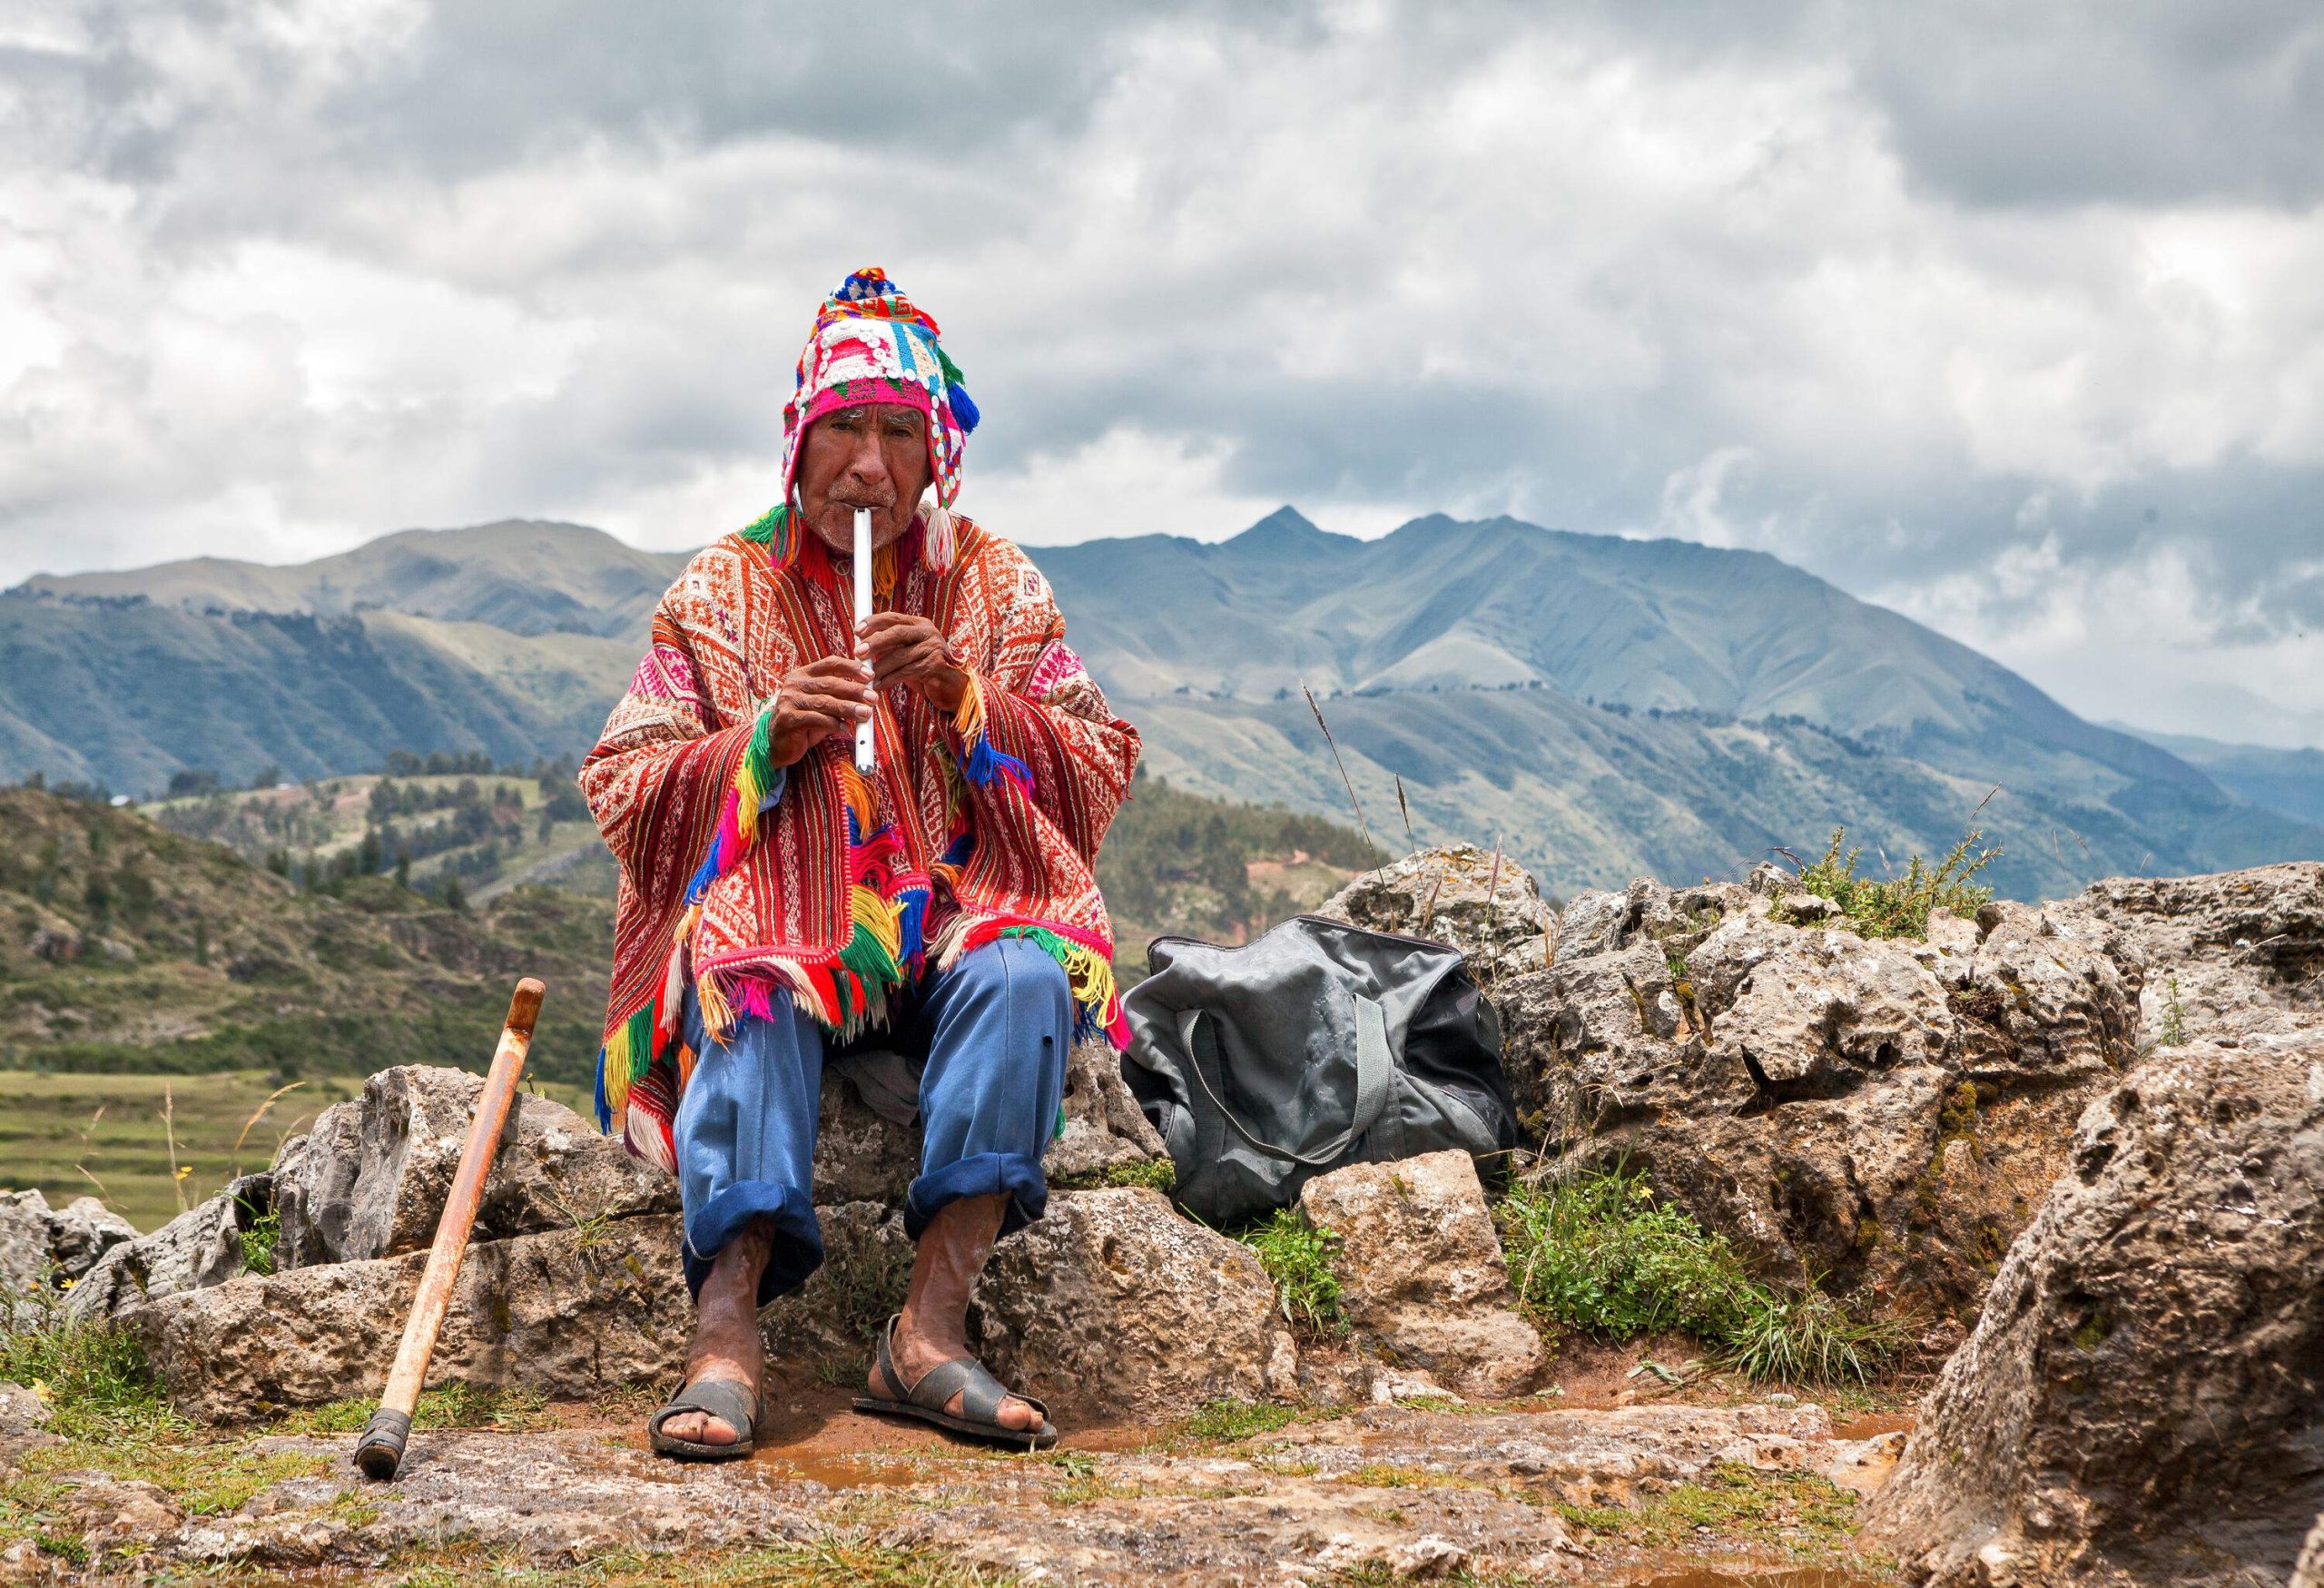 An elderly man draped in a colourful patterned cape playing a musical instrument while sitting on the rocks.